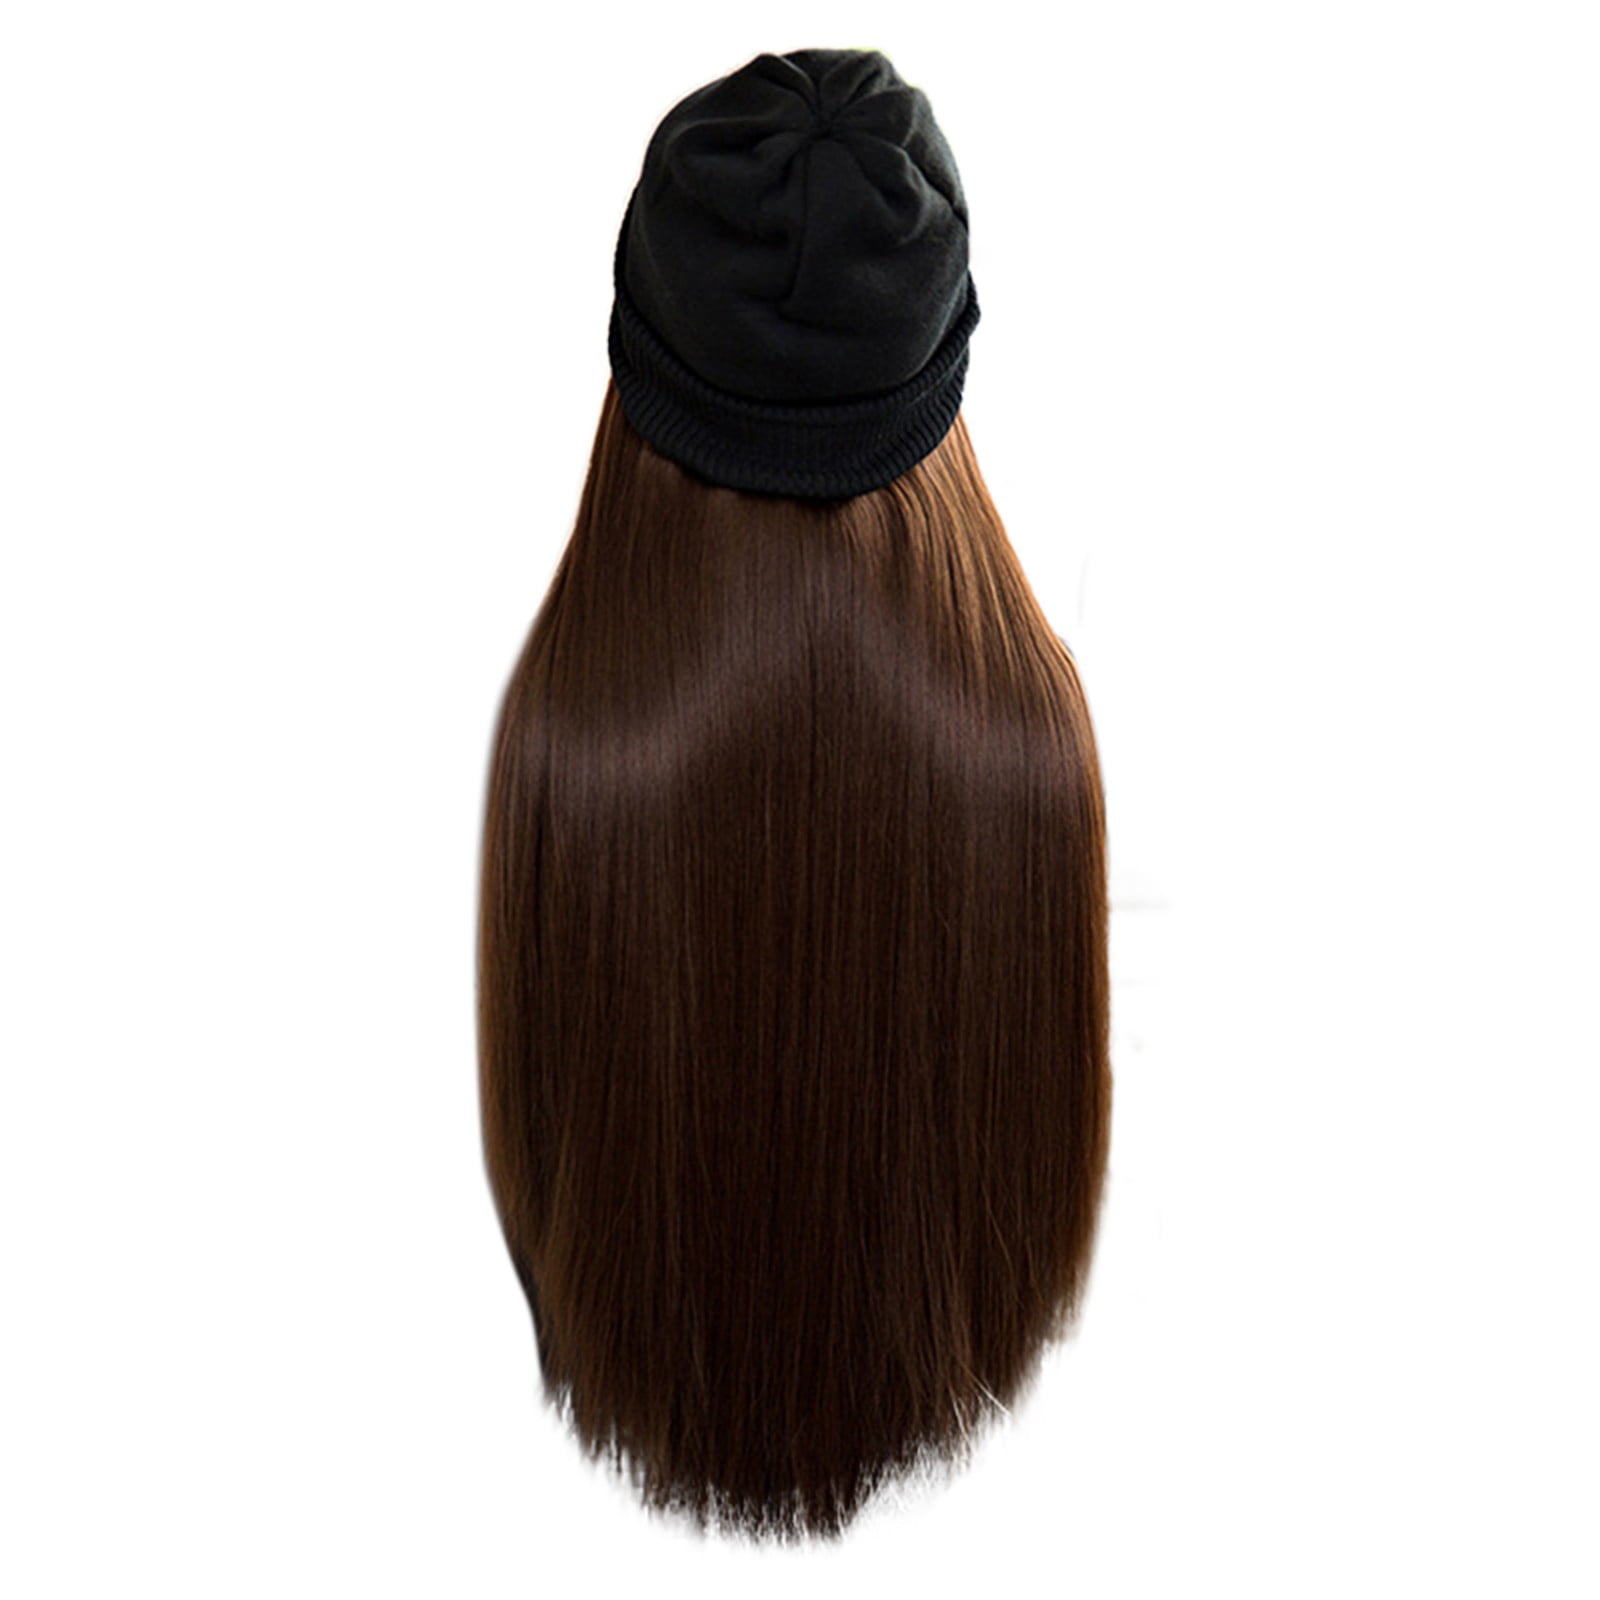 Aomili Long Wave Wig Cap Girl Daily Casual Hat with Wig Creative Baseball Hat with Hair Wig Attached